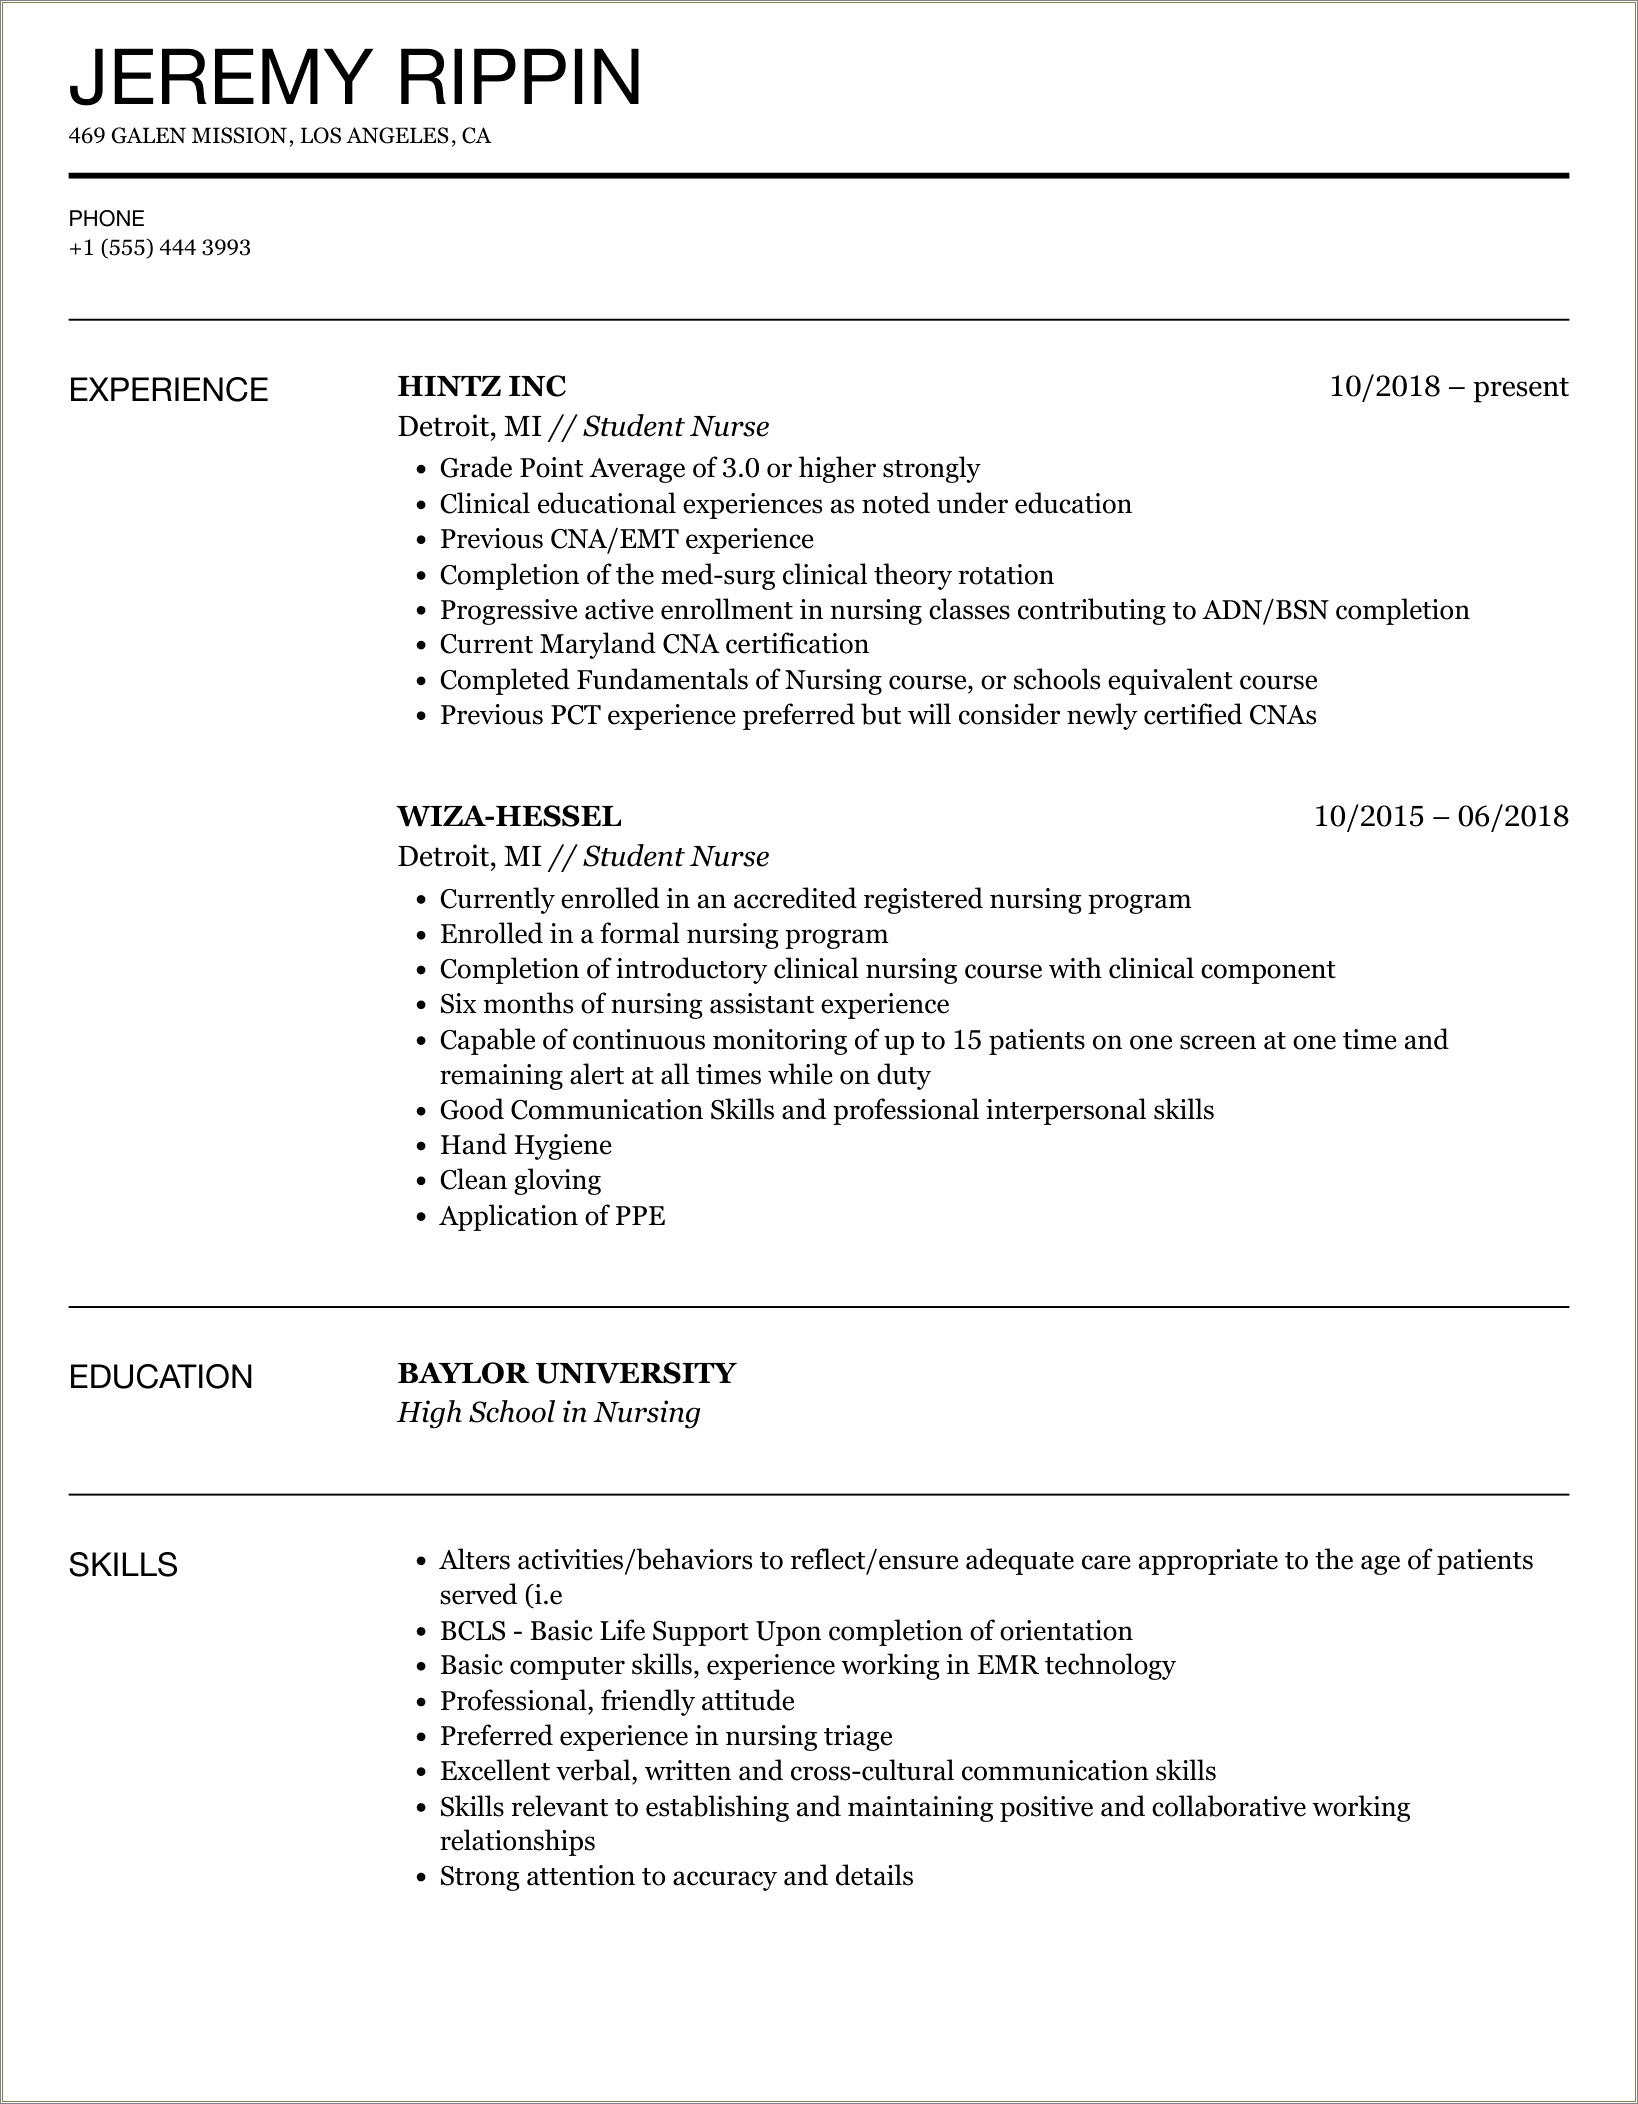 Ob Student Nurse Clinical Experience Resume